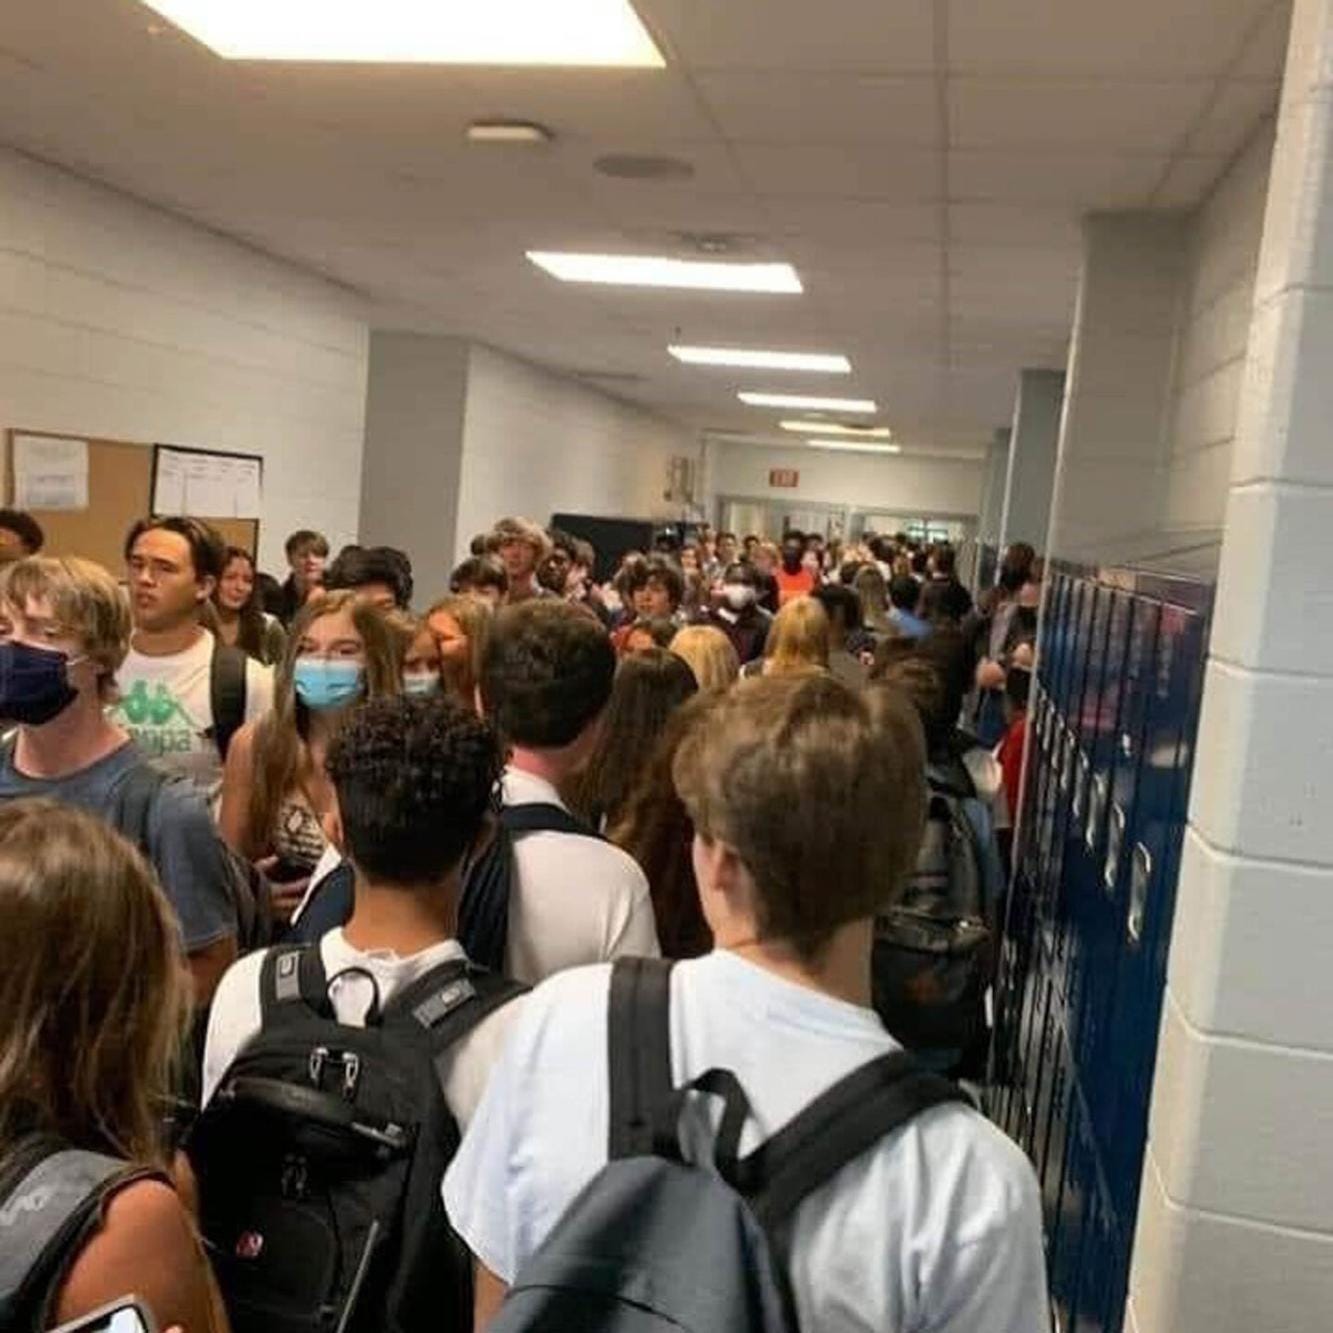 A crowded school hallway. Some students are masked and some are not.